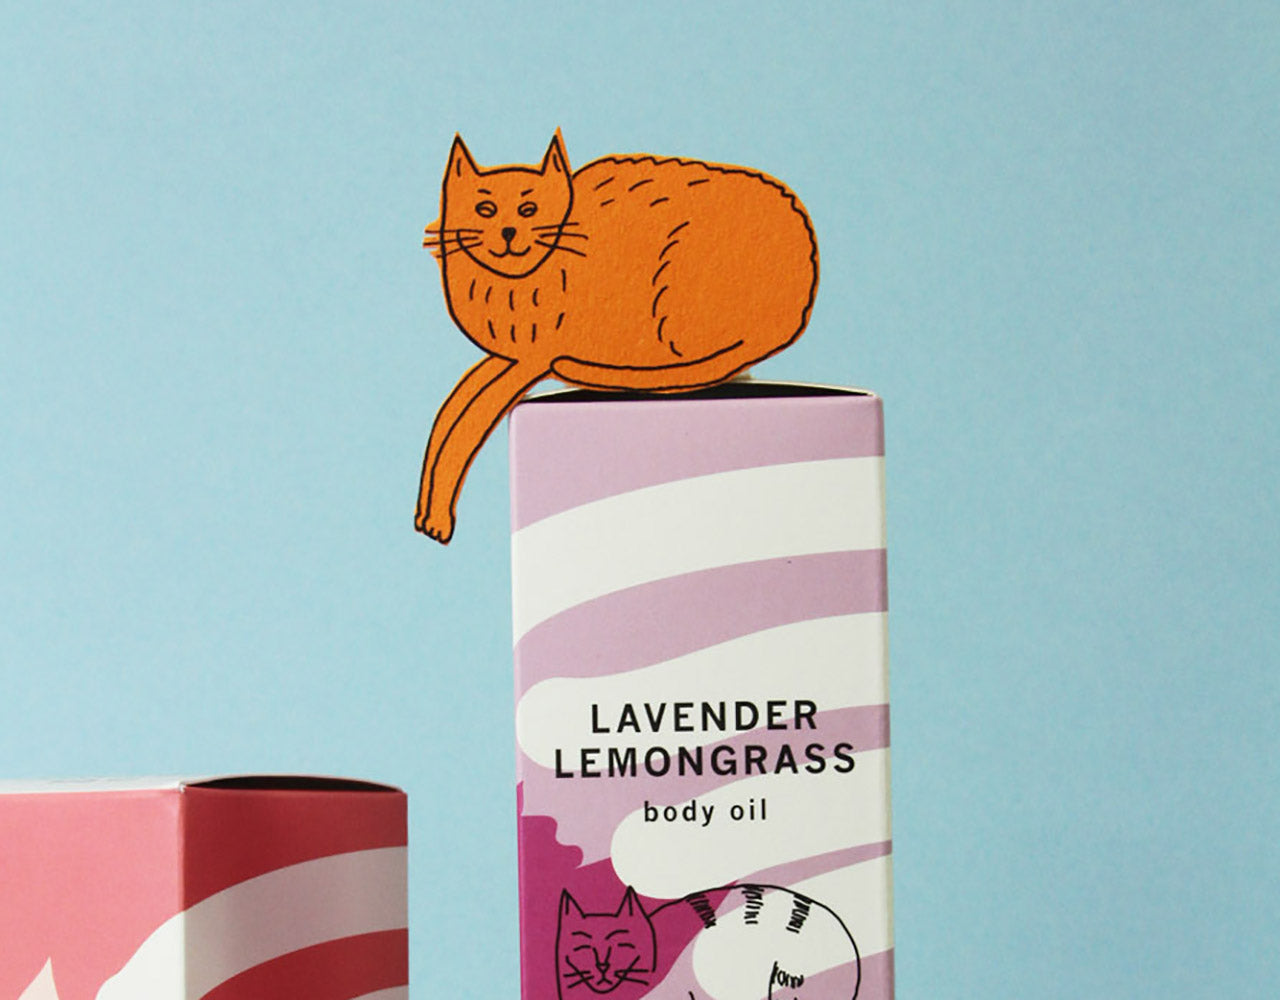 hand-drawn orange paper cat cutout on top of a box of Meow Meow Tweet Lavender Lemongrass body oil against a light blue background